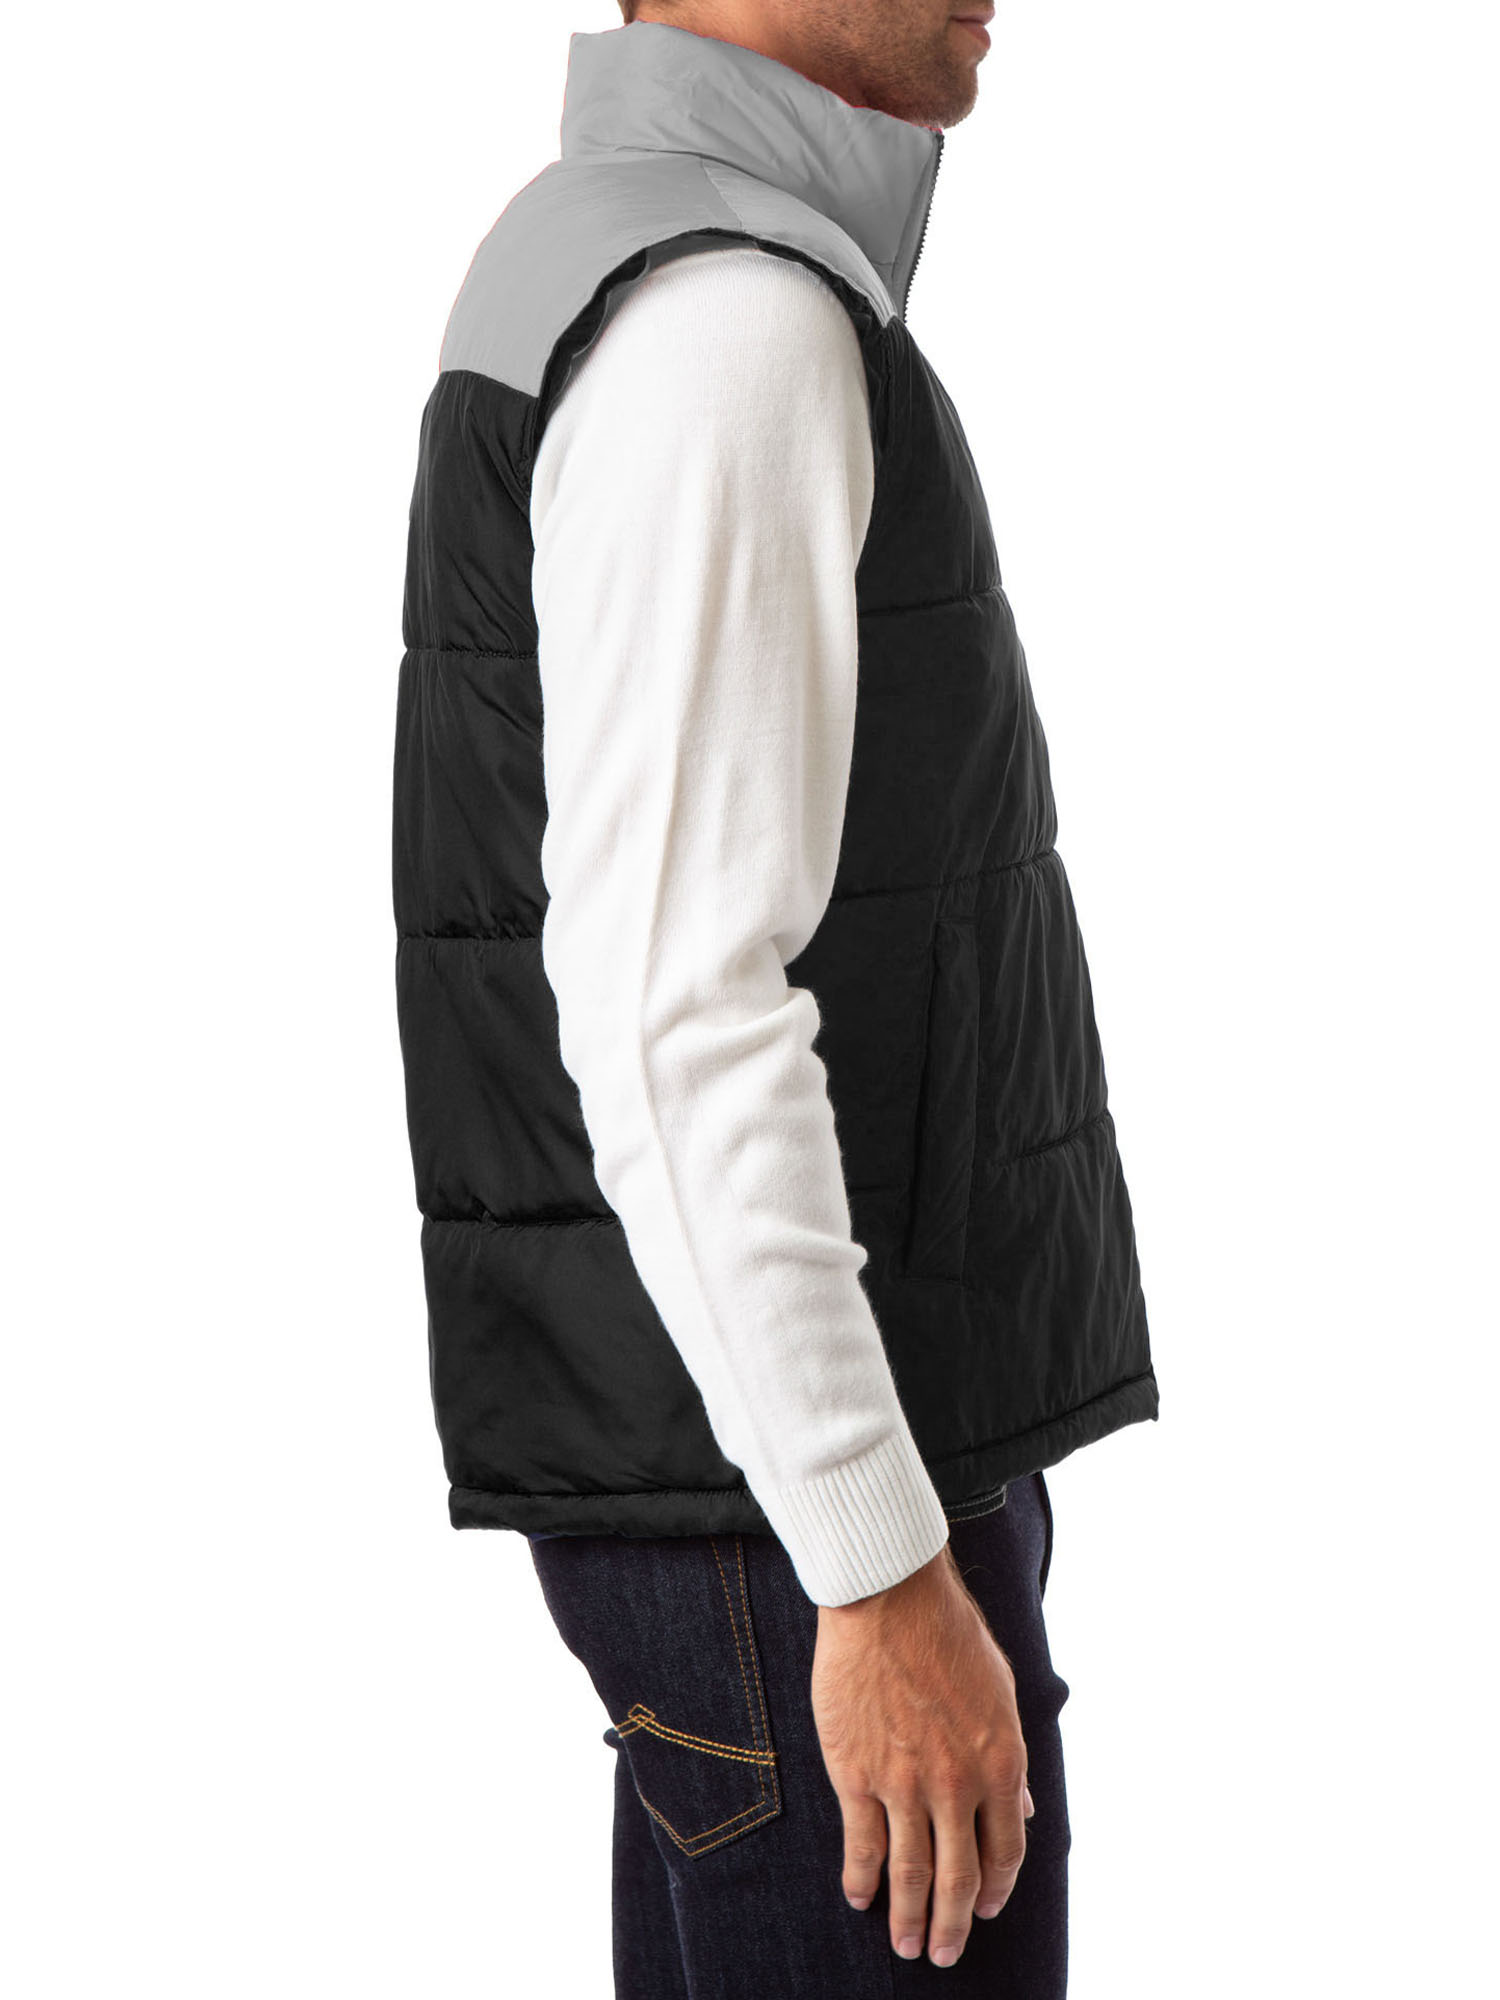 U.S. Polo Assn. Puffer Vest - image 4 of 5